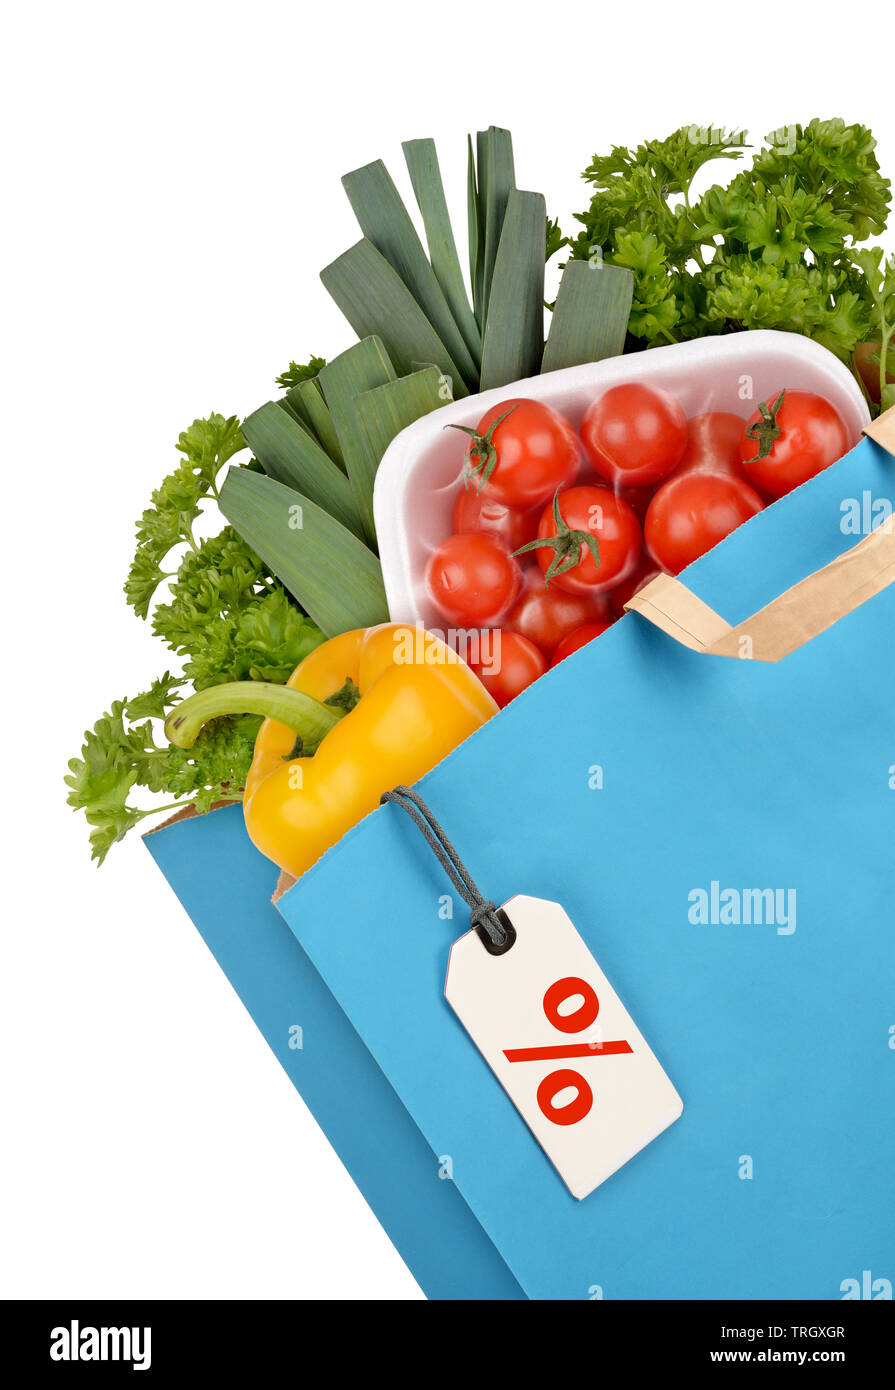 Grocery bag isolated with on white background Stock Photo